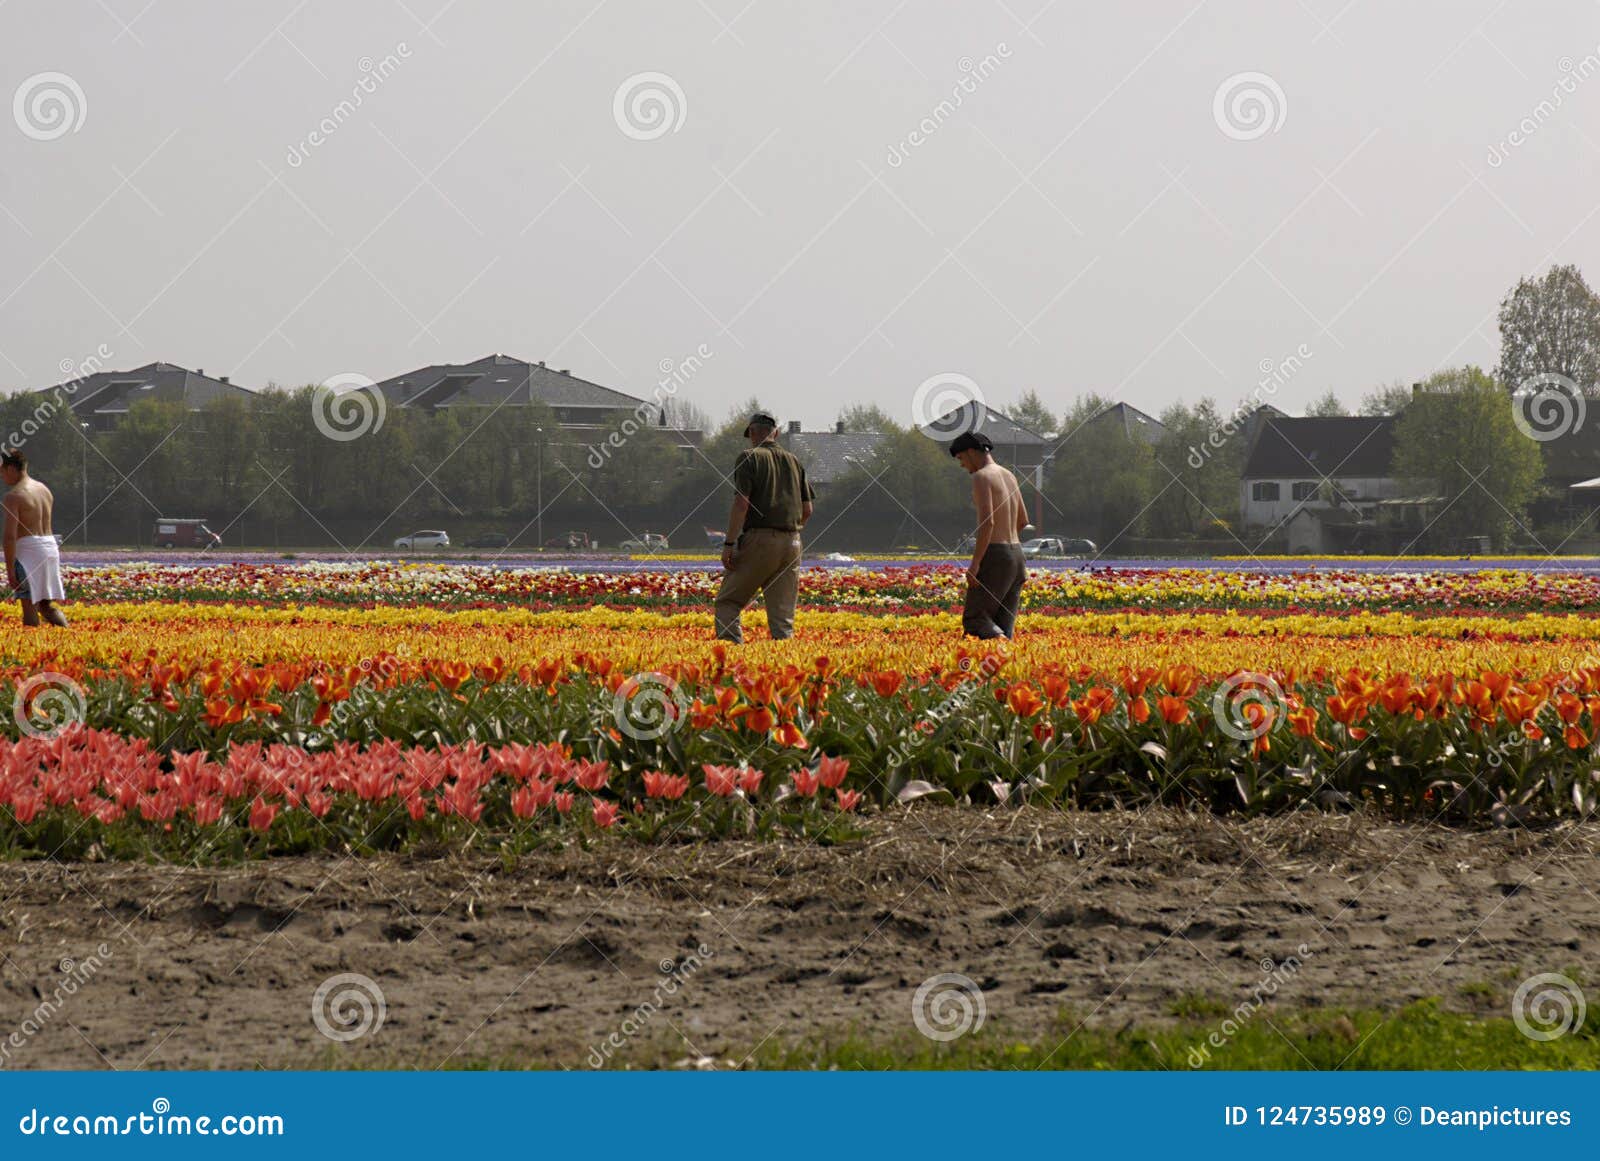 Jobs picking tulips in holland